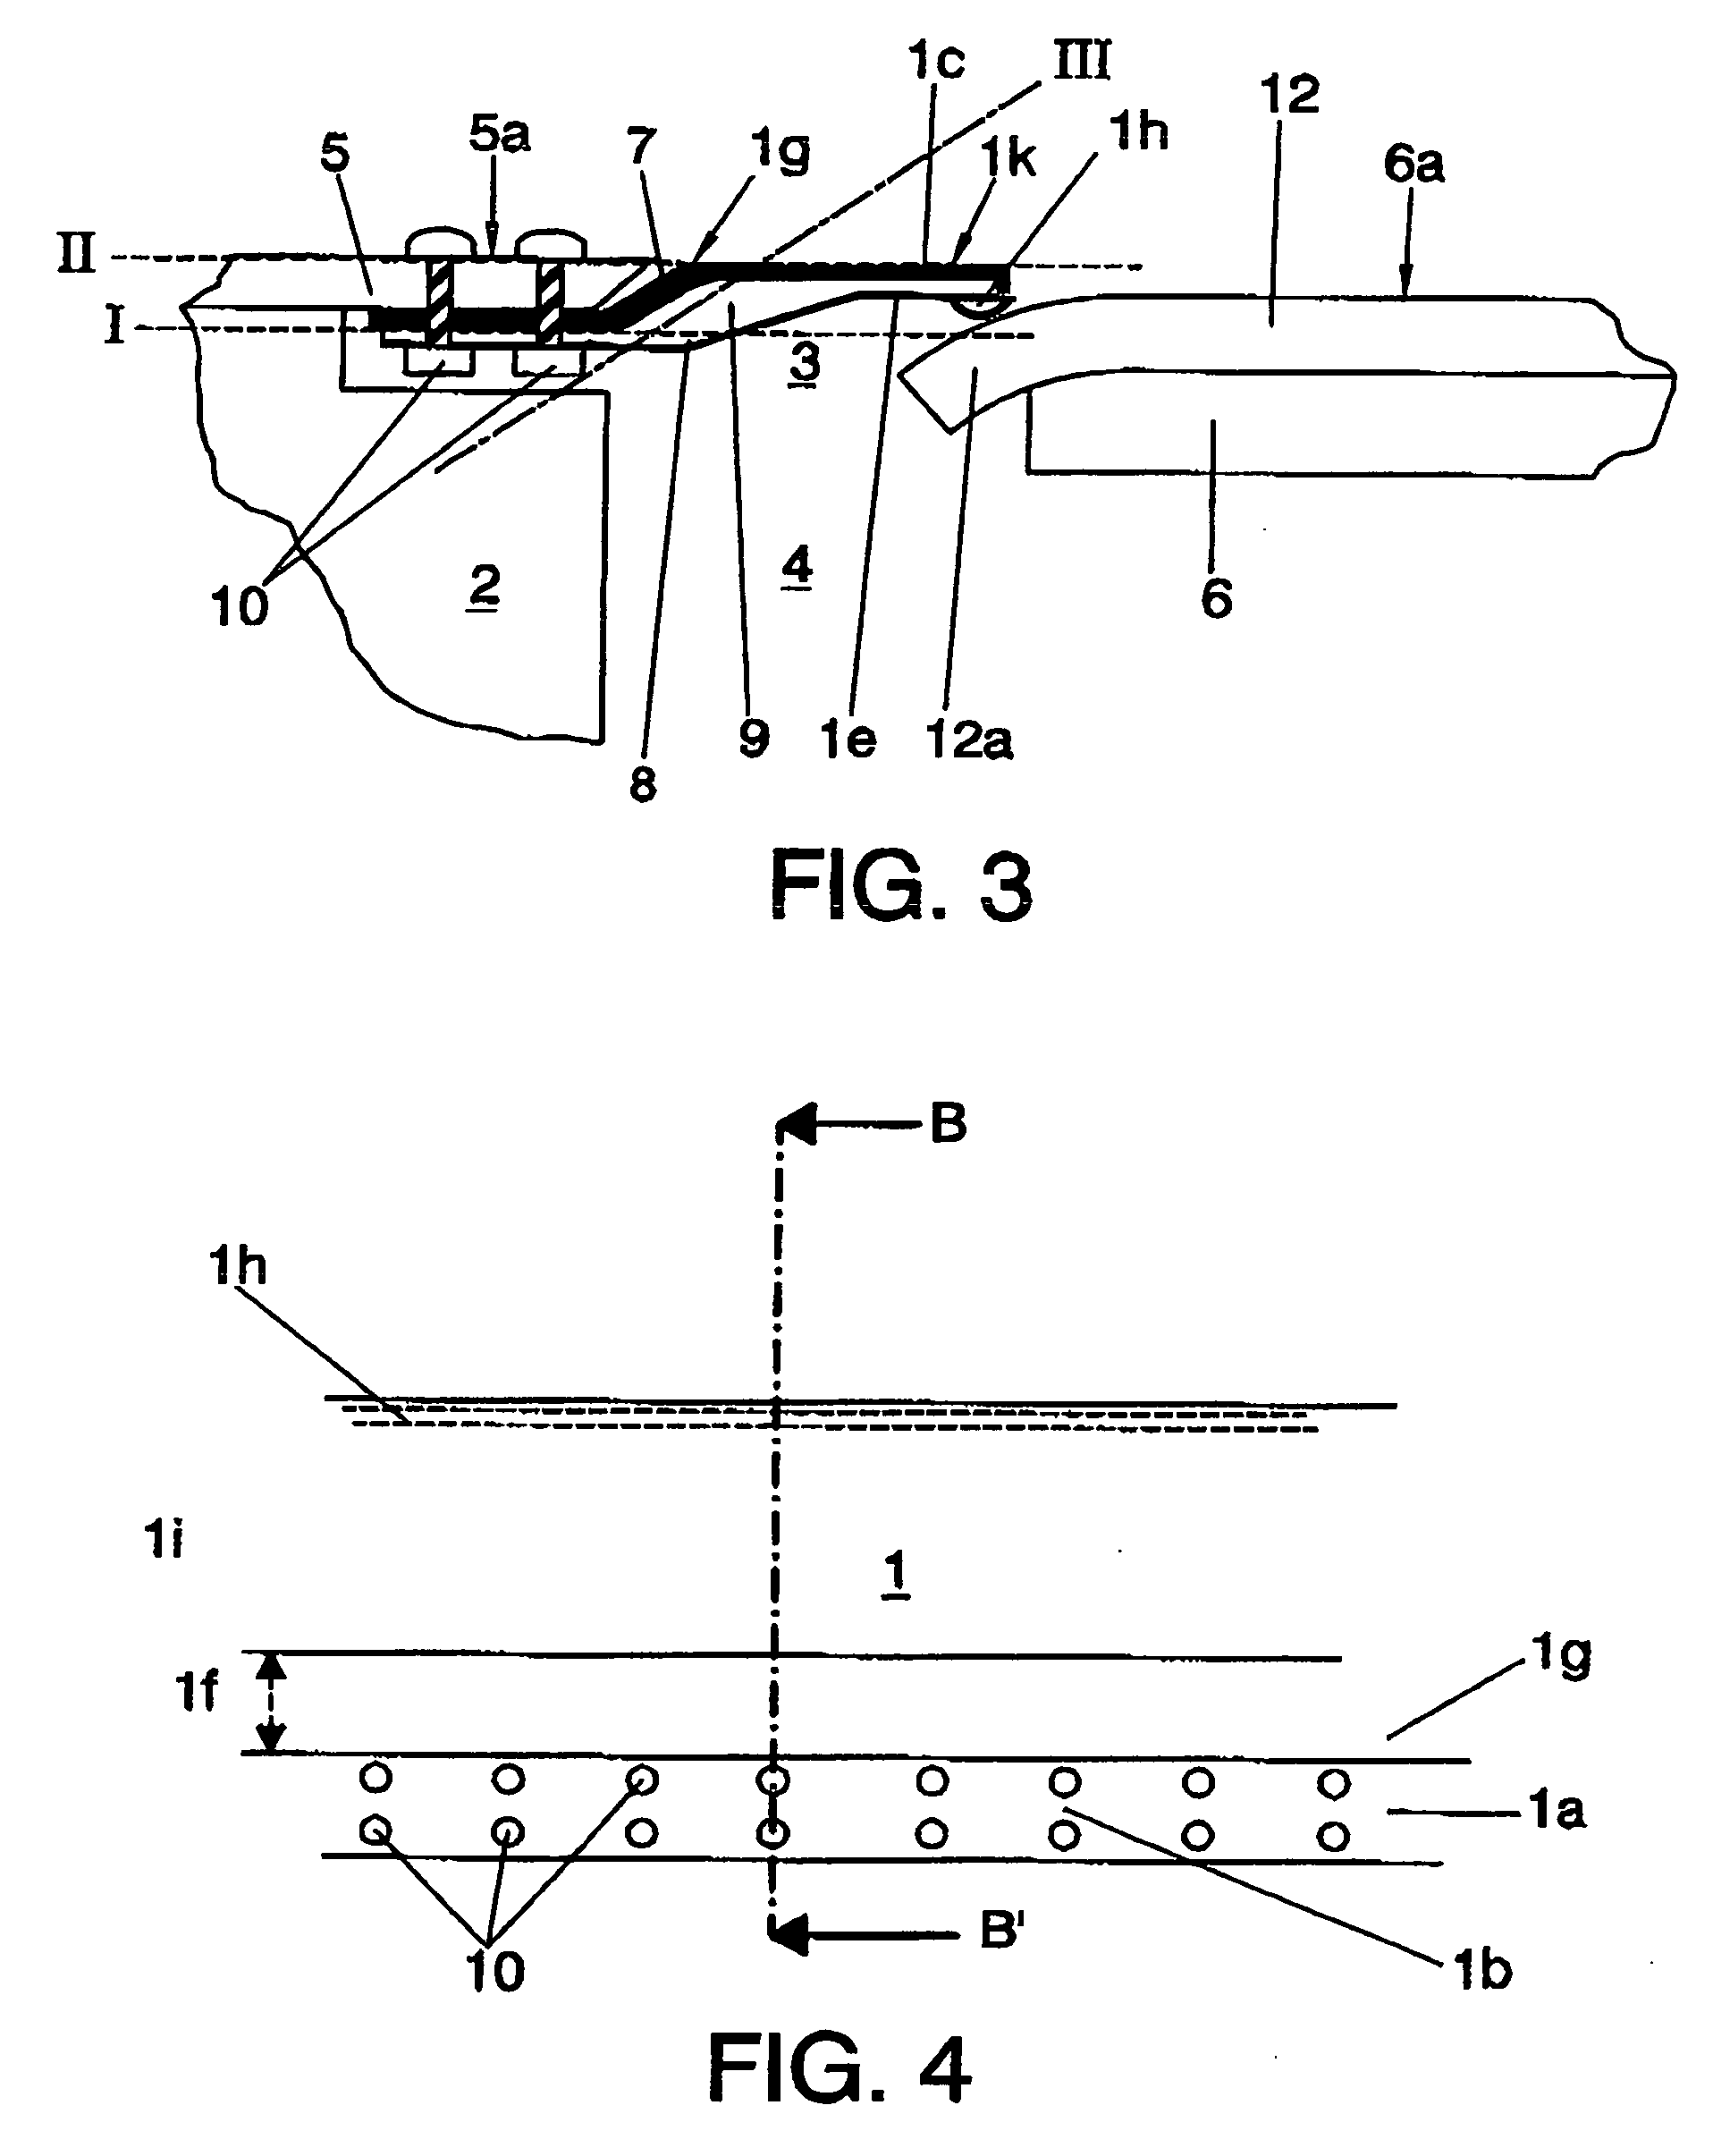 Reinforced cover for gaps in an aerodynamic contour